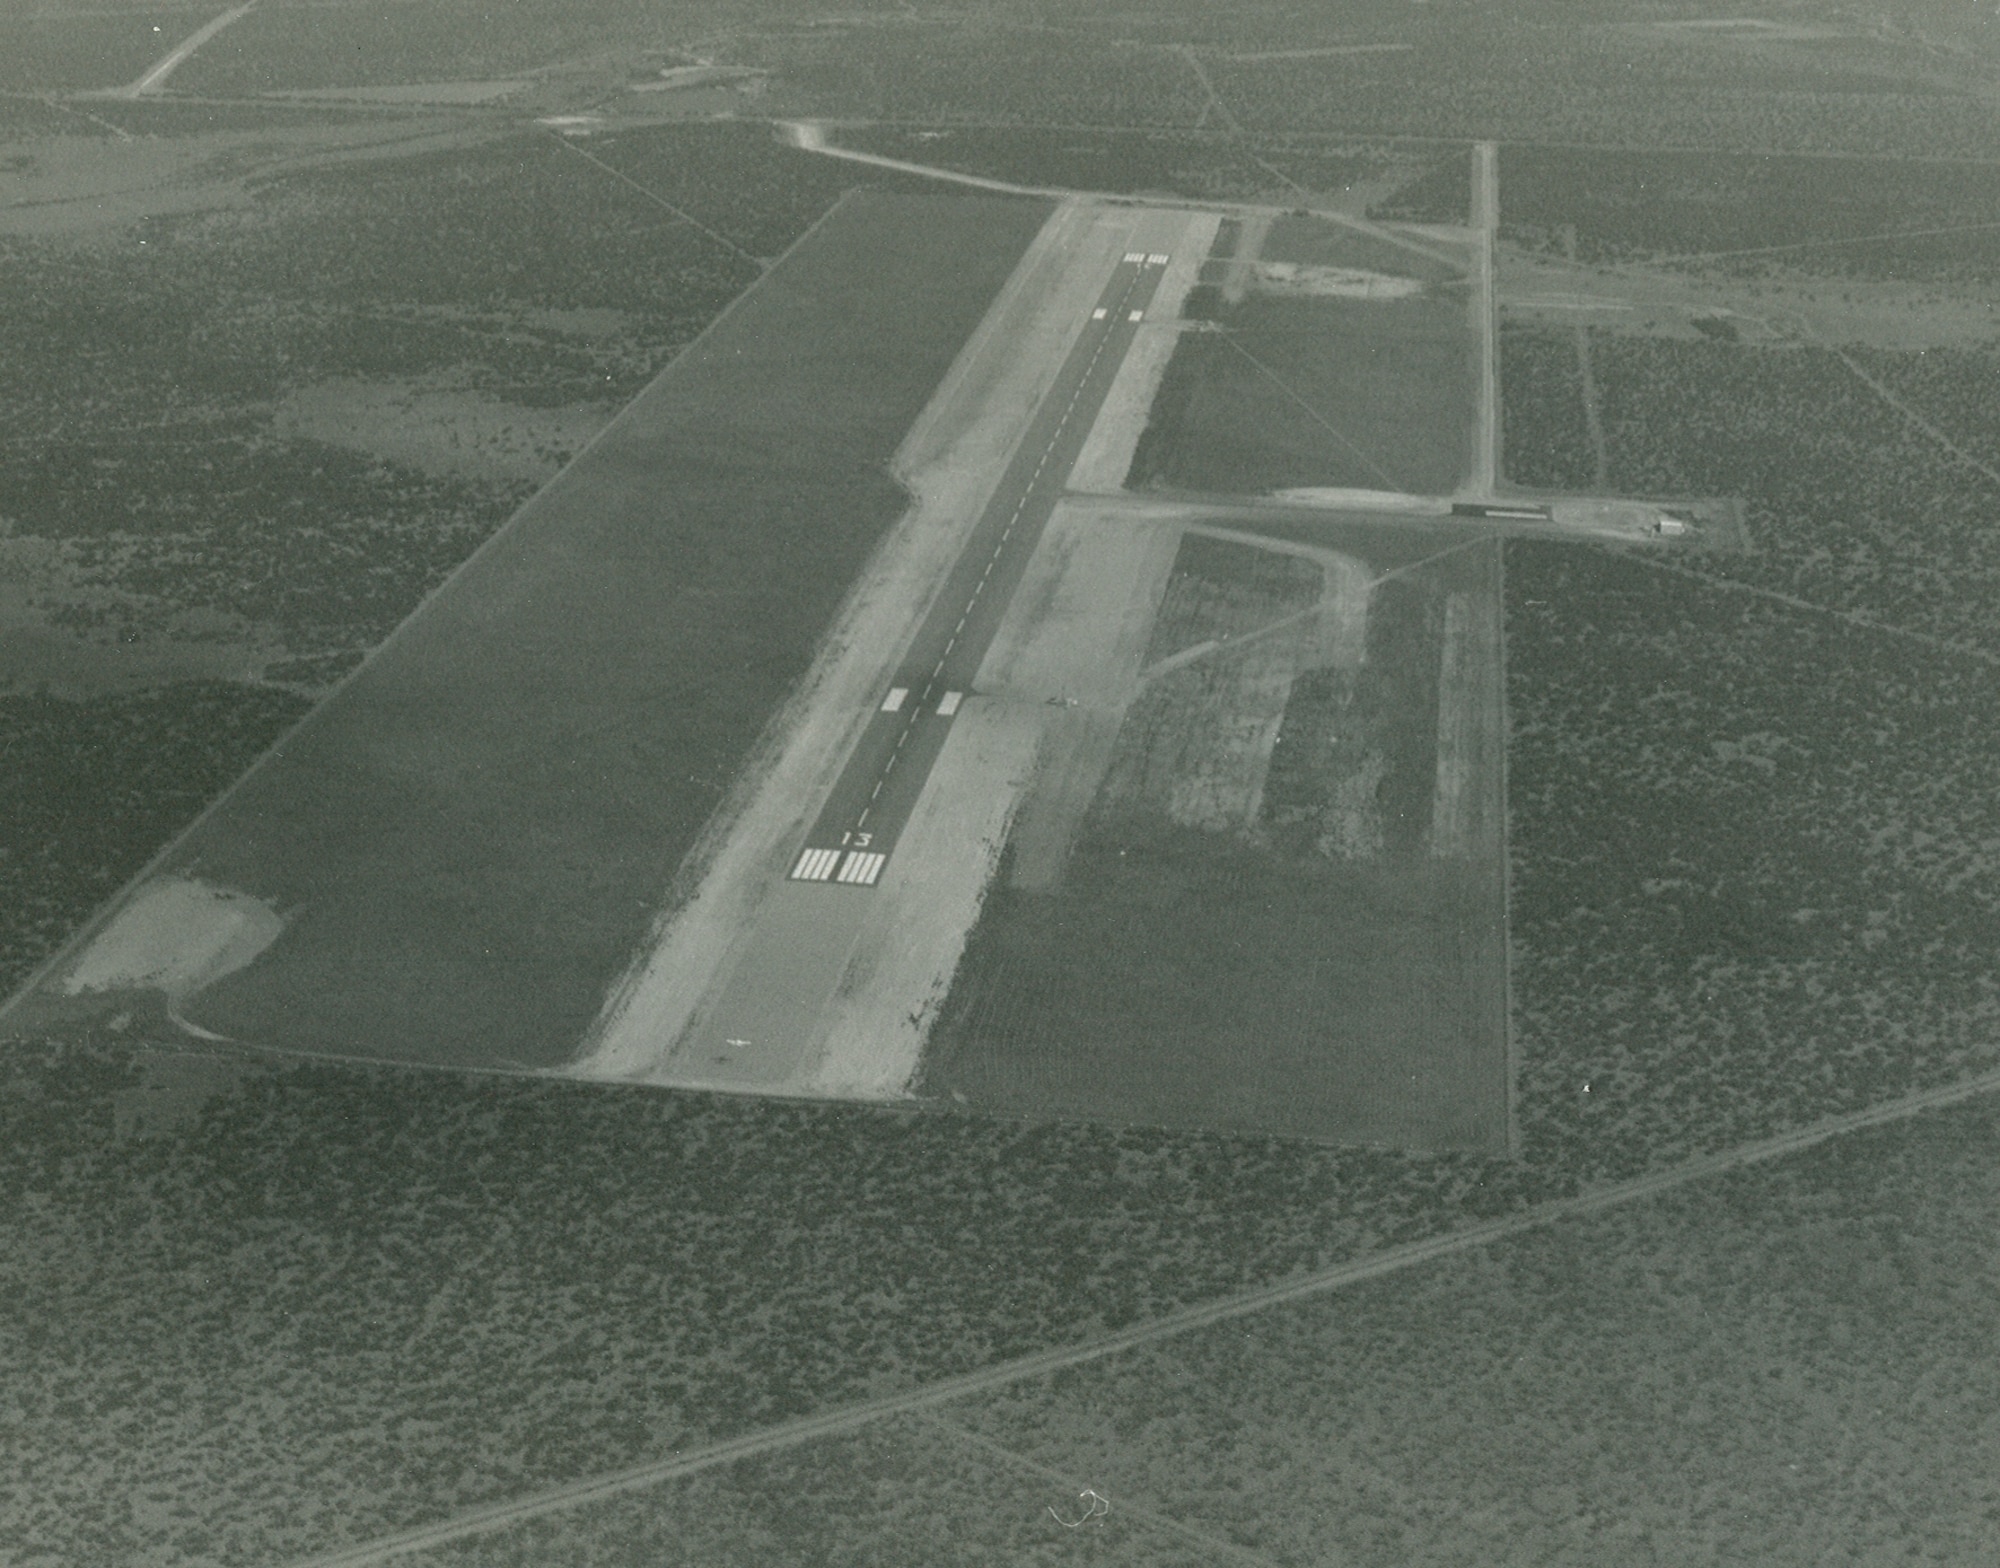 Thirty-year anniversary of the Spofford Auxiliary Airfield was celebrated on Jan. 28, 1991, the new Auxiliary Field (“Wizard” Auxiliary Field) at Spofford, Texas opened up for Laughlin touch-and-go landing operations. As a result of the establishment of the new auxiliary air field, the wing cancelled its lease on its existing auxiliary field at Eagle Pass—which had been under Laughlin’s jurisdiction and control since 1955 (when it was transferred to us from the now-closed Laredo AFB).